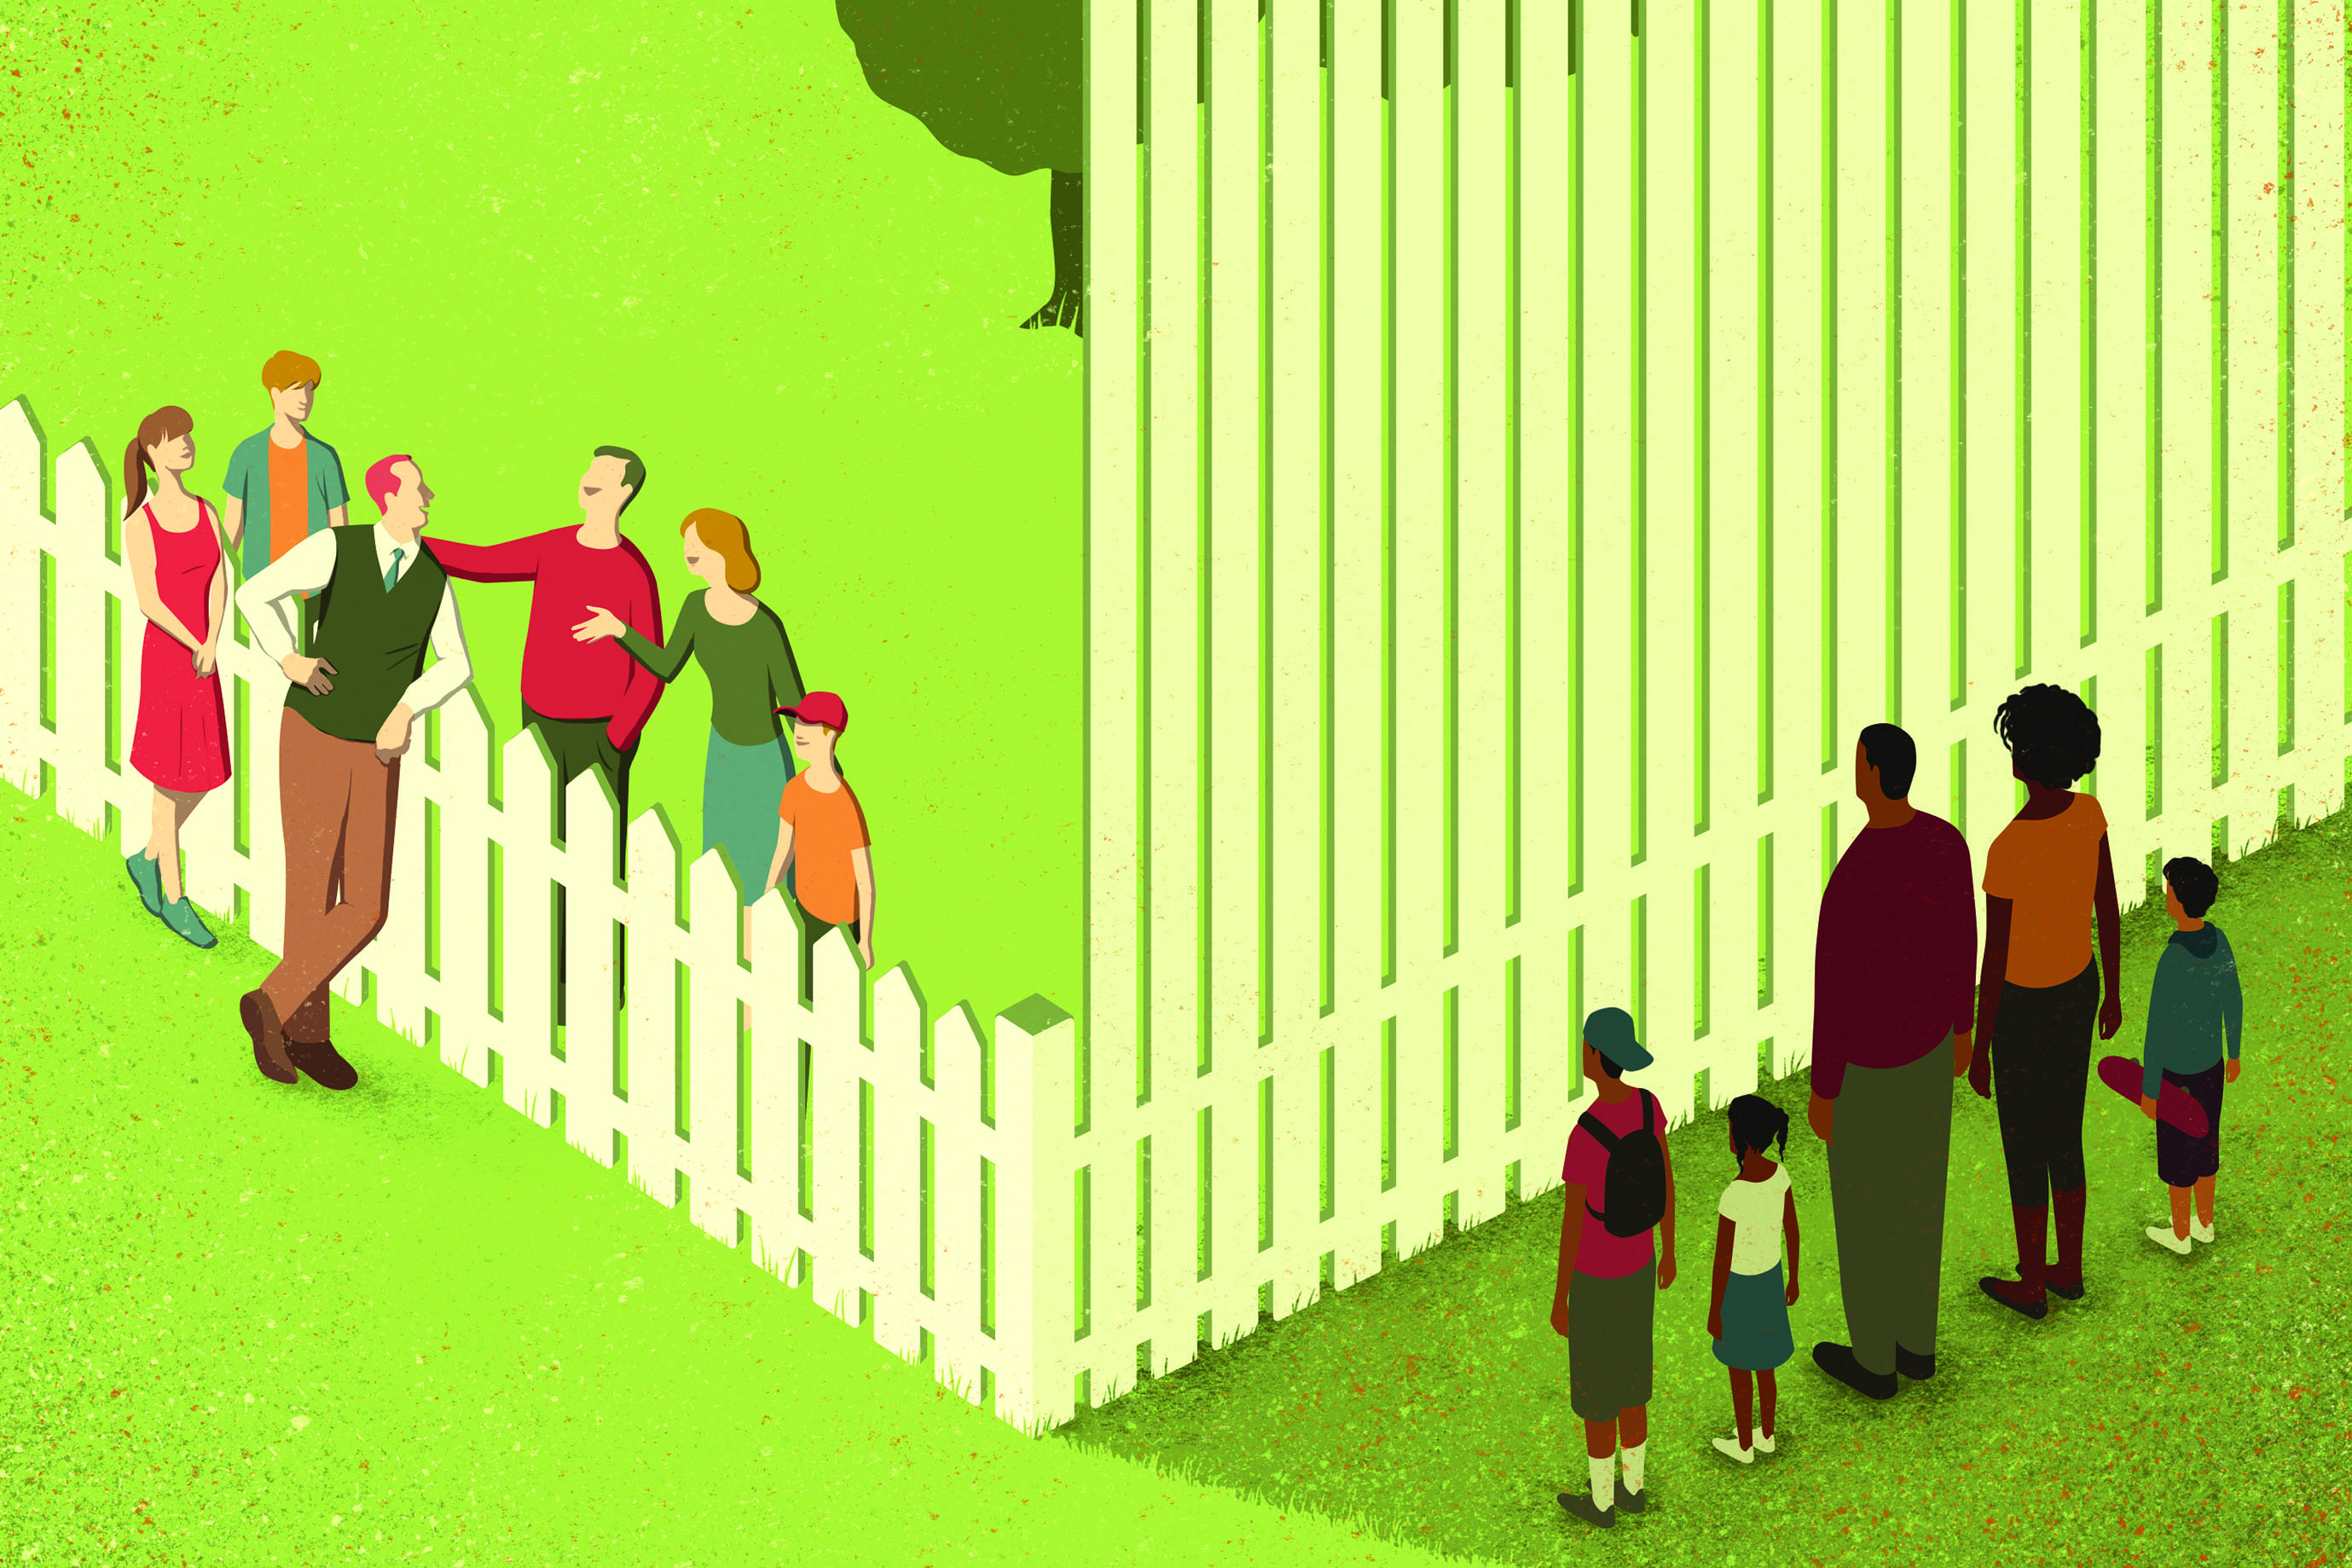 illustration of two groups of people, one white, the other of color, standing on opposite sides of picket fences